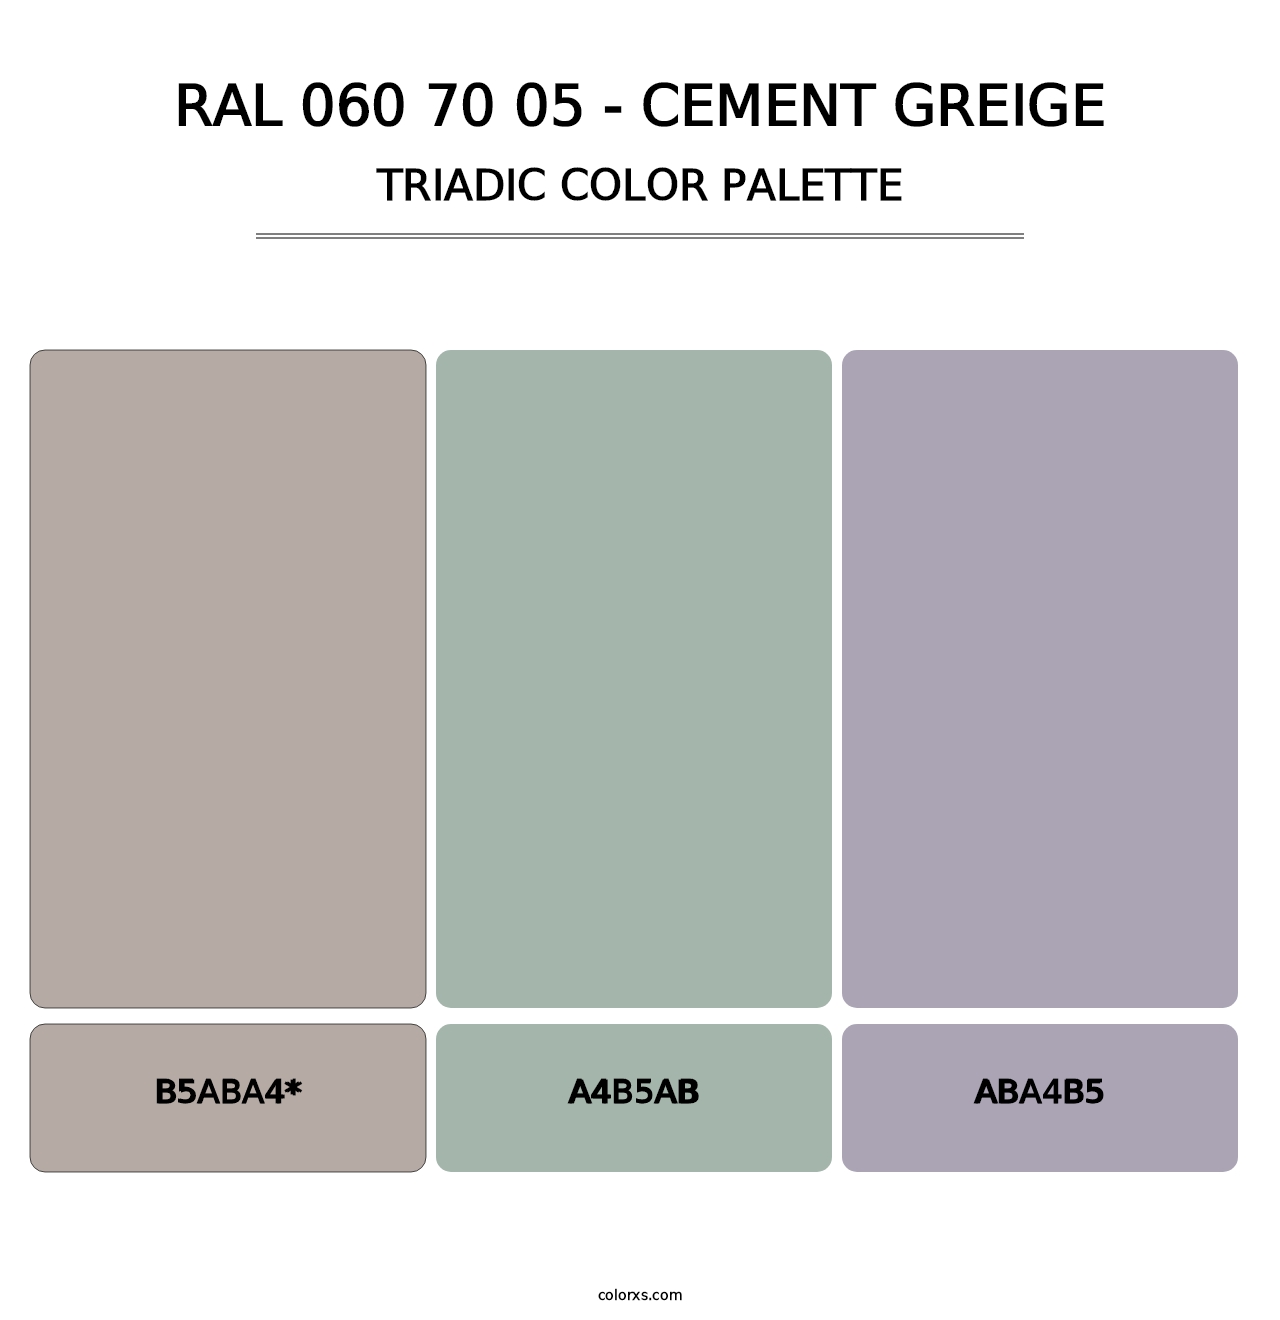 RAL 060 70 05 - Cement Greige - Triadic Color Palette